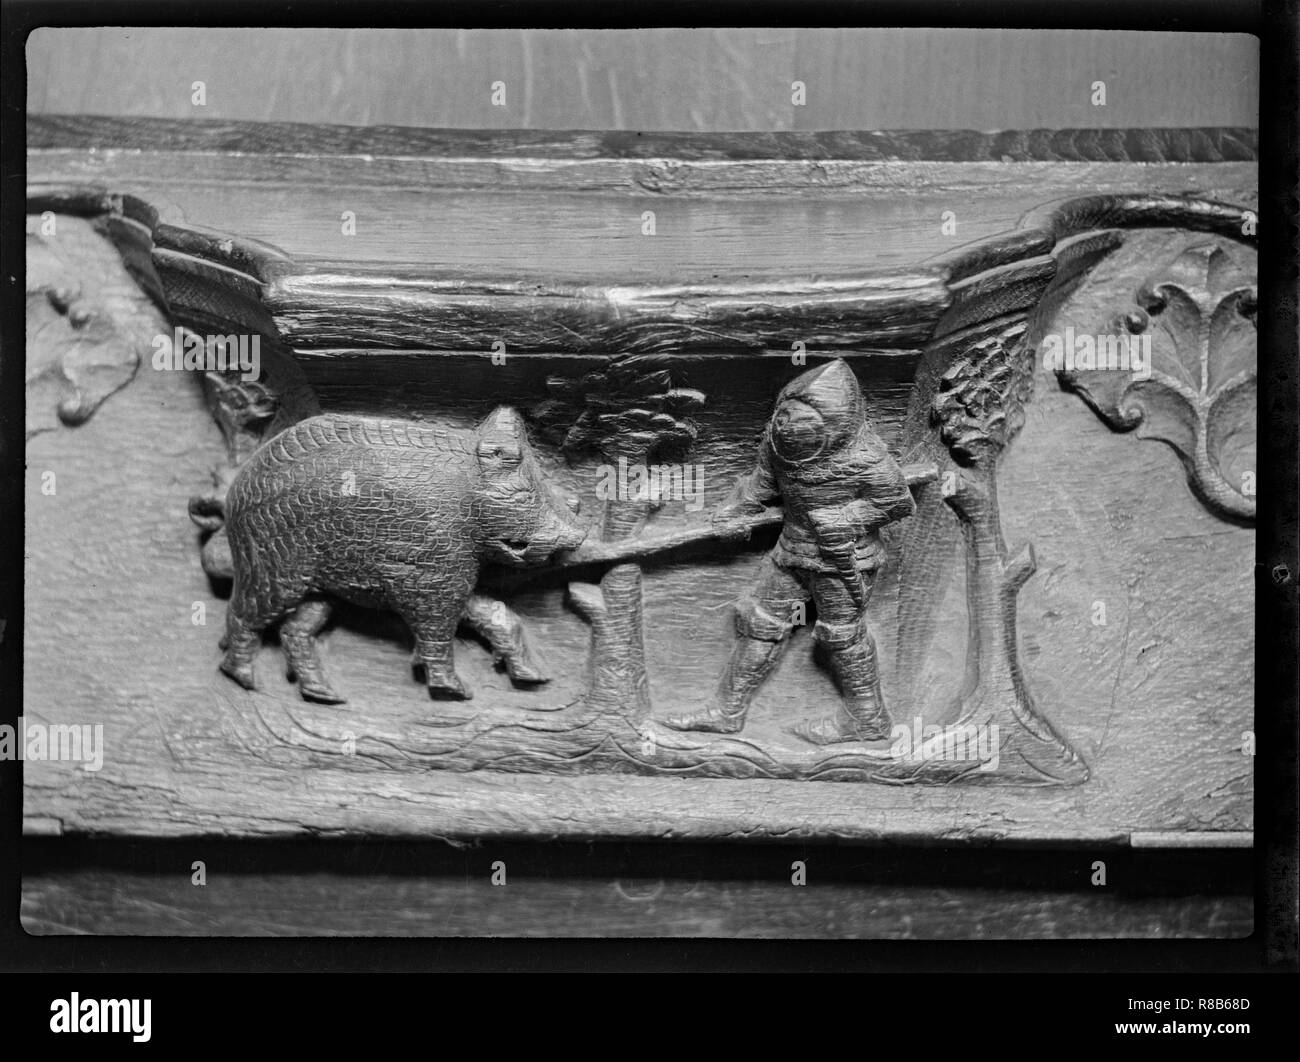 Misericord, St Mary's Church, North Bar Within, Beverley, East Riding of Yorkshire, 1920-1945. Creator: Marjory L Wight. Stock Photo